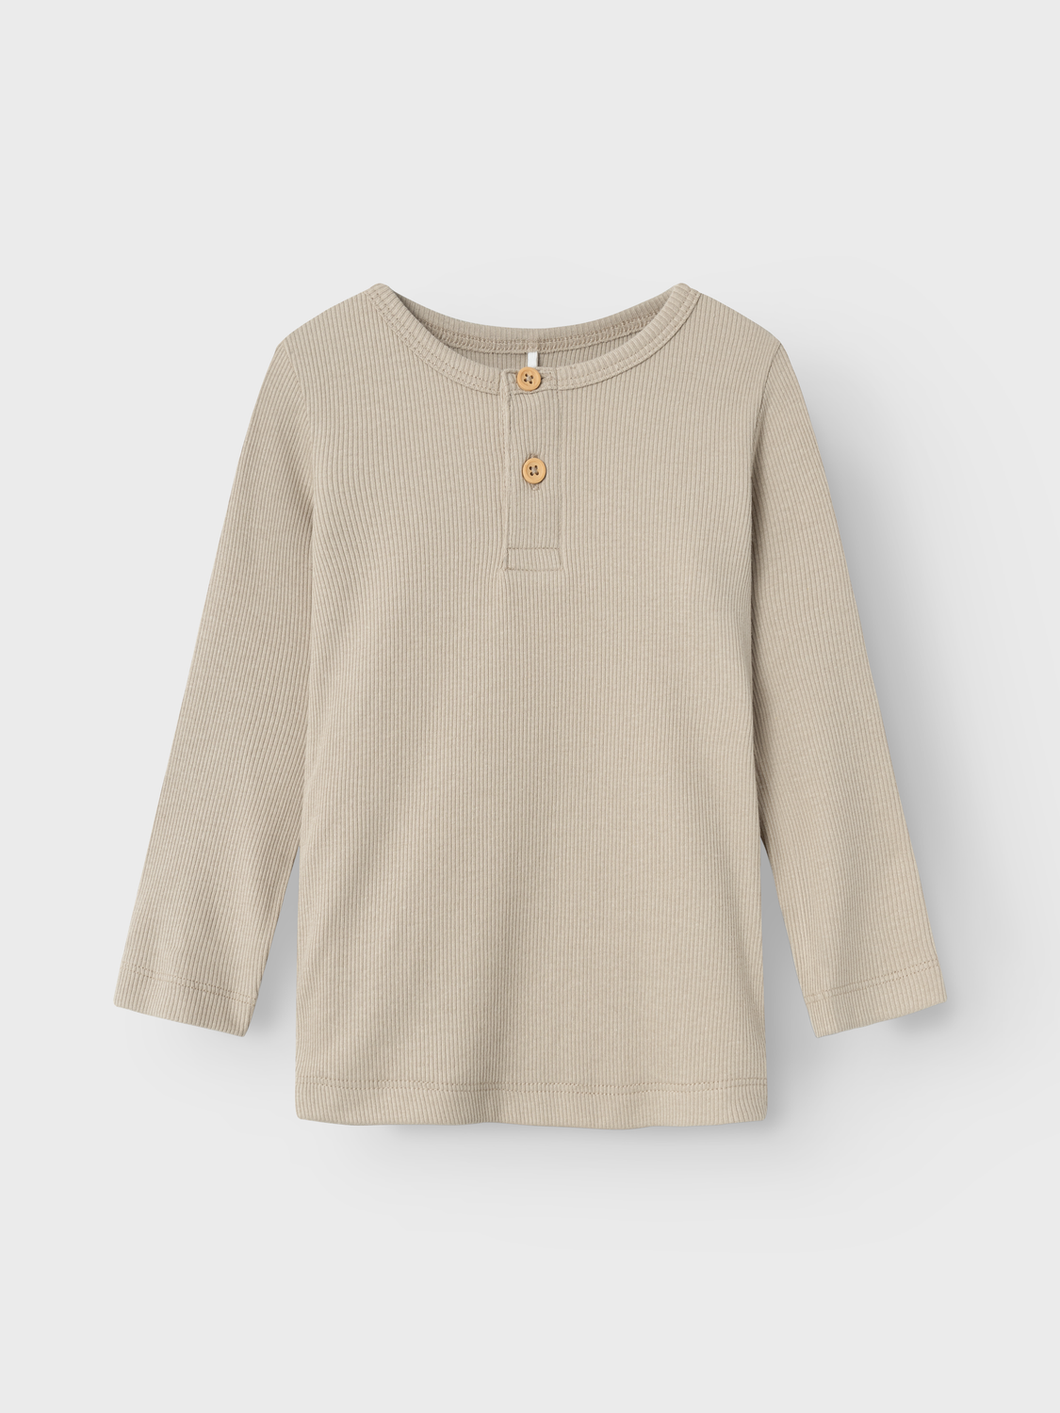 NMMKAB T-Shirts & Tops - Pure Cashmere